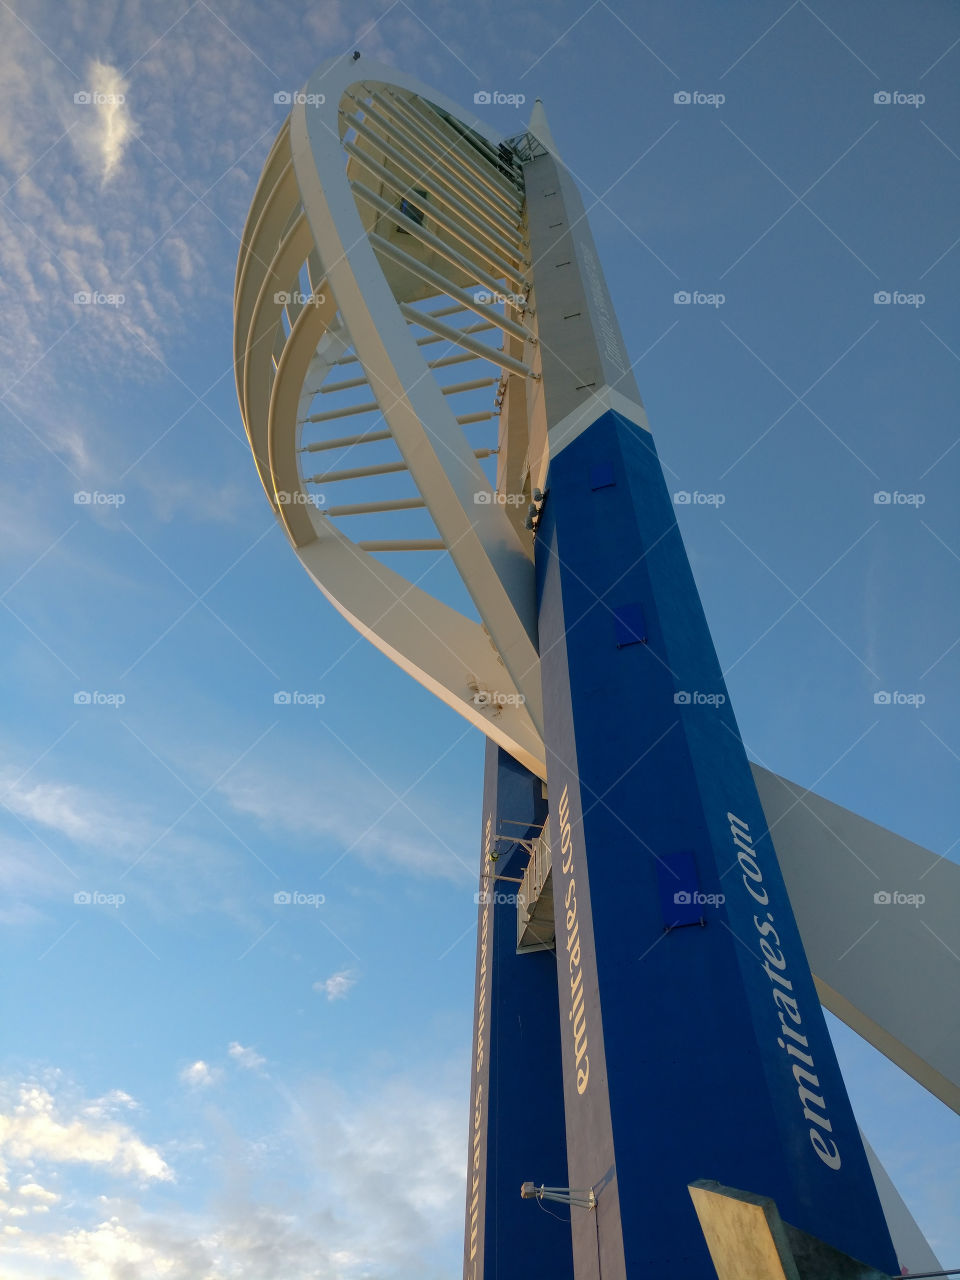 Spinnaker Tower from close up